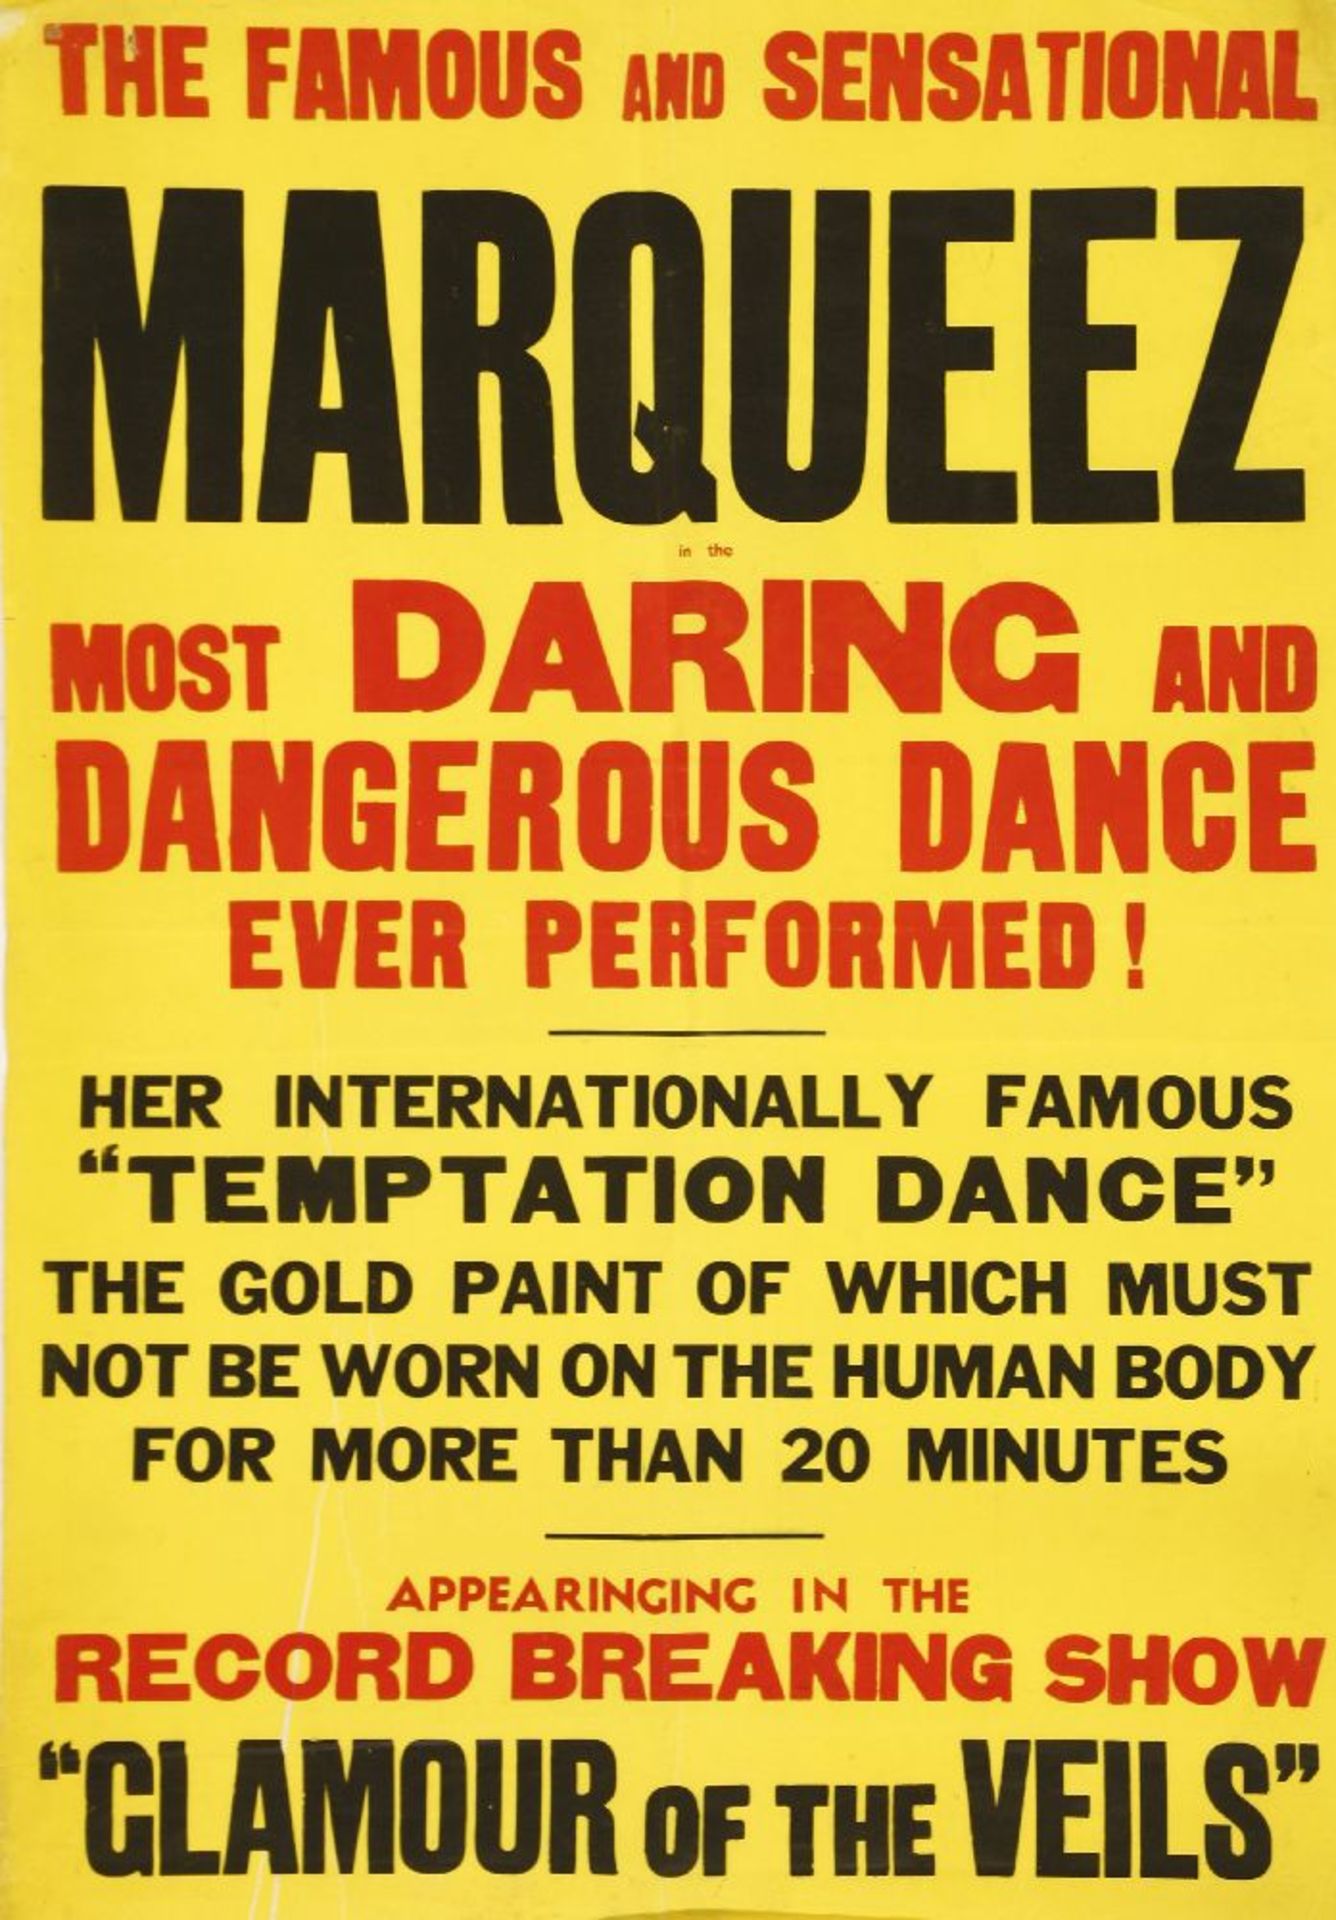 THE MOST DARING DANGEROUS DANCE EVER PERFORMED,a 1940s poster for the famous and sensational